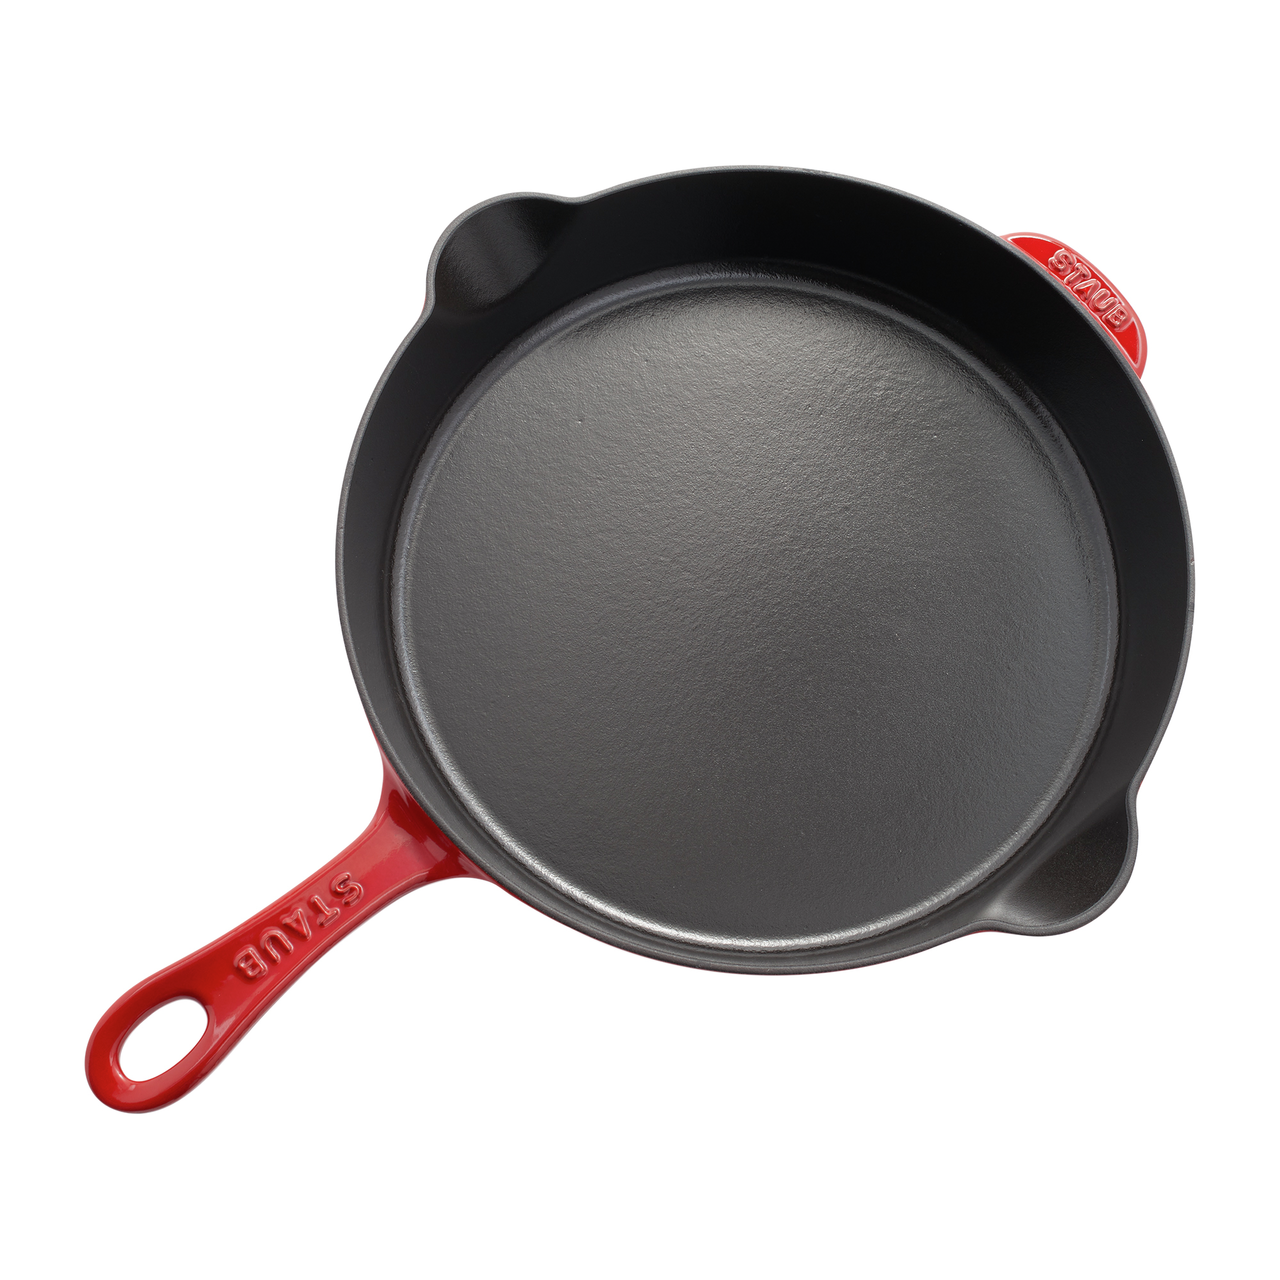 https://www.zwilling.com/on/demandware.static/-/Sites-zwilling-us-Library/default/dwd813d0df/images/product-content/product-specific-images/staub-pdp-hotspot-modules/staub-traditional-skillet-cherry.png